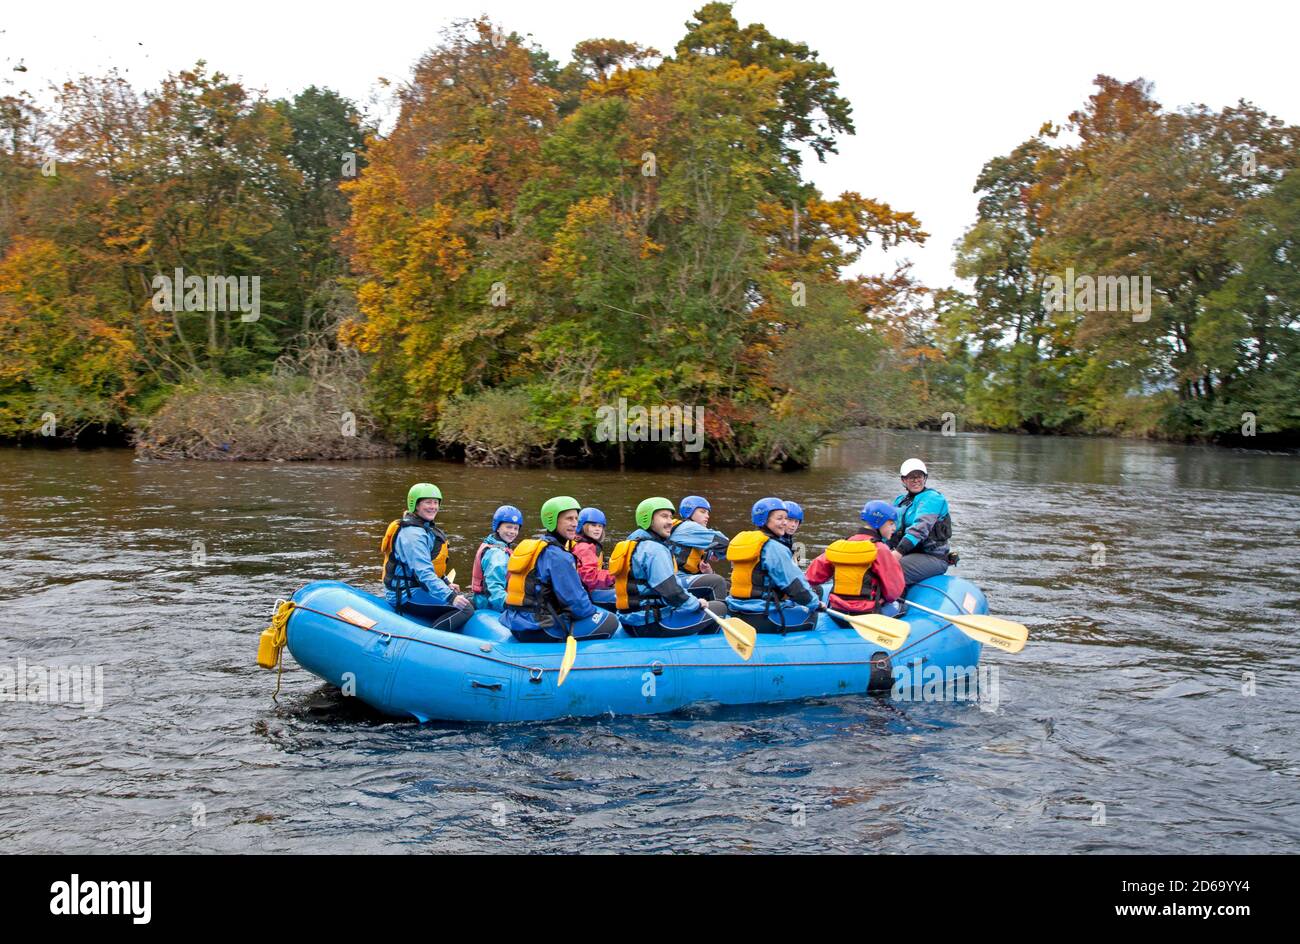 Aberfeldy, Perthshire, Scotland, UK. 15 October 2020. Cloudy weather did not matter to this group of people setting out on a White water rafting adventure on the River Tay surrounded by autumn colour. Credit: Scottishcreative/Alamy Live News. Stock Photo